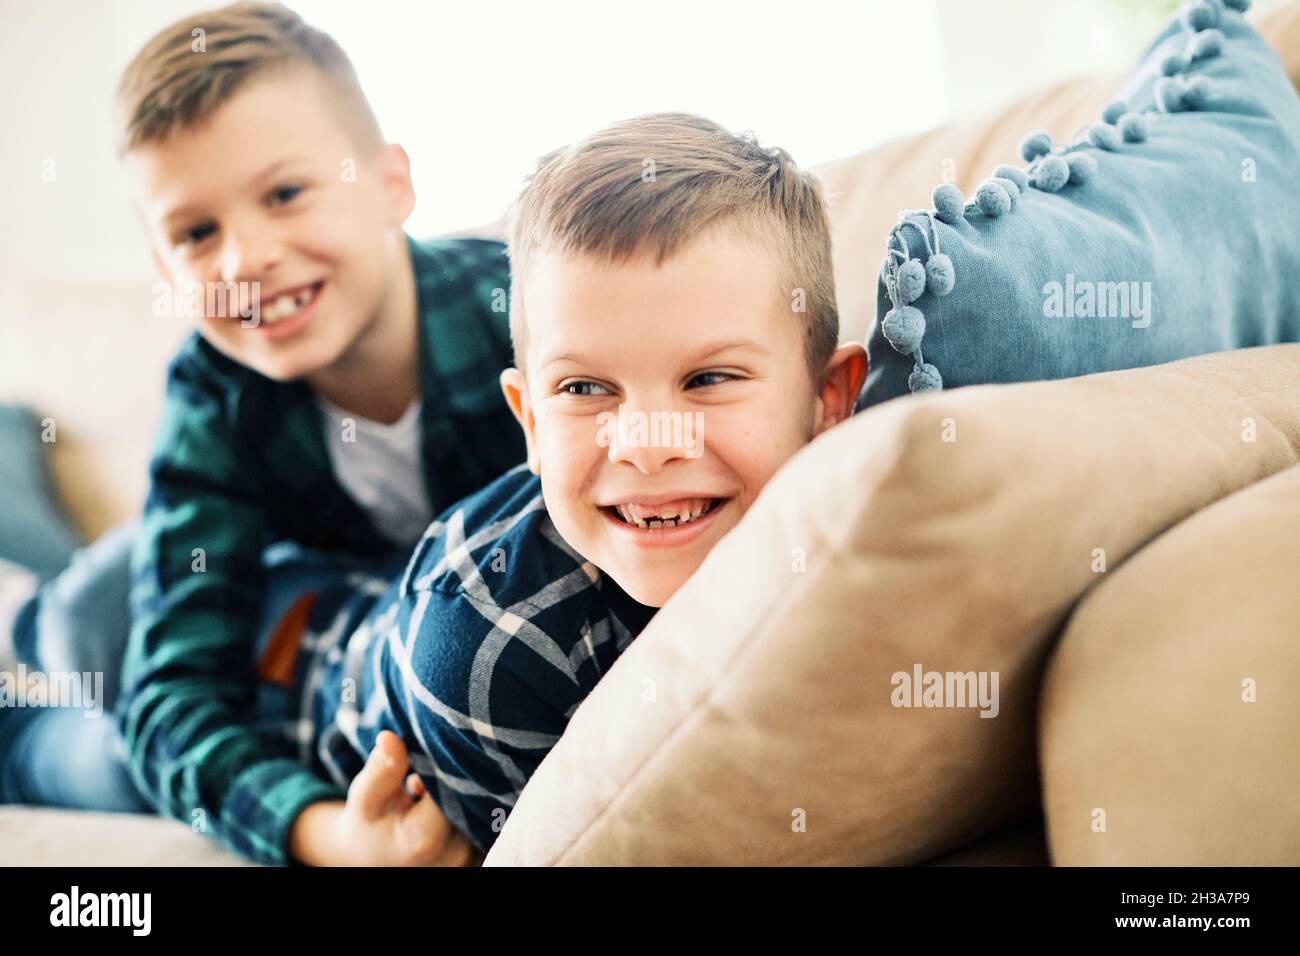 child brother friend having fun playing laughing happy kid childhood together friendship Stock Photo